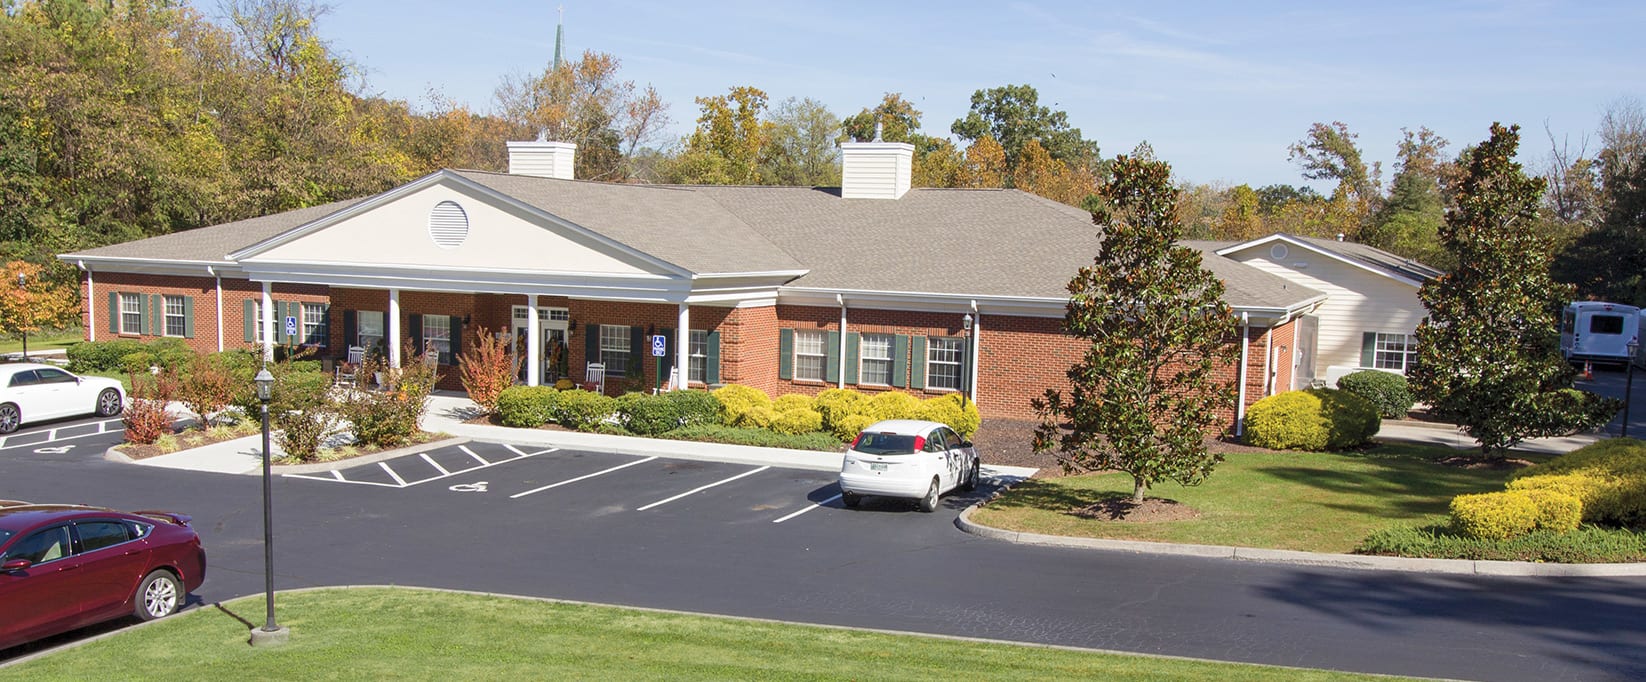 Brookdale Colonial Heights Assisted Living and Memory Care Kingsport, TN 37663 13 reviews pic picture